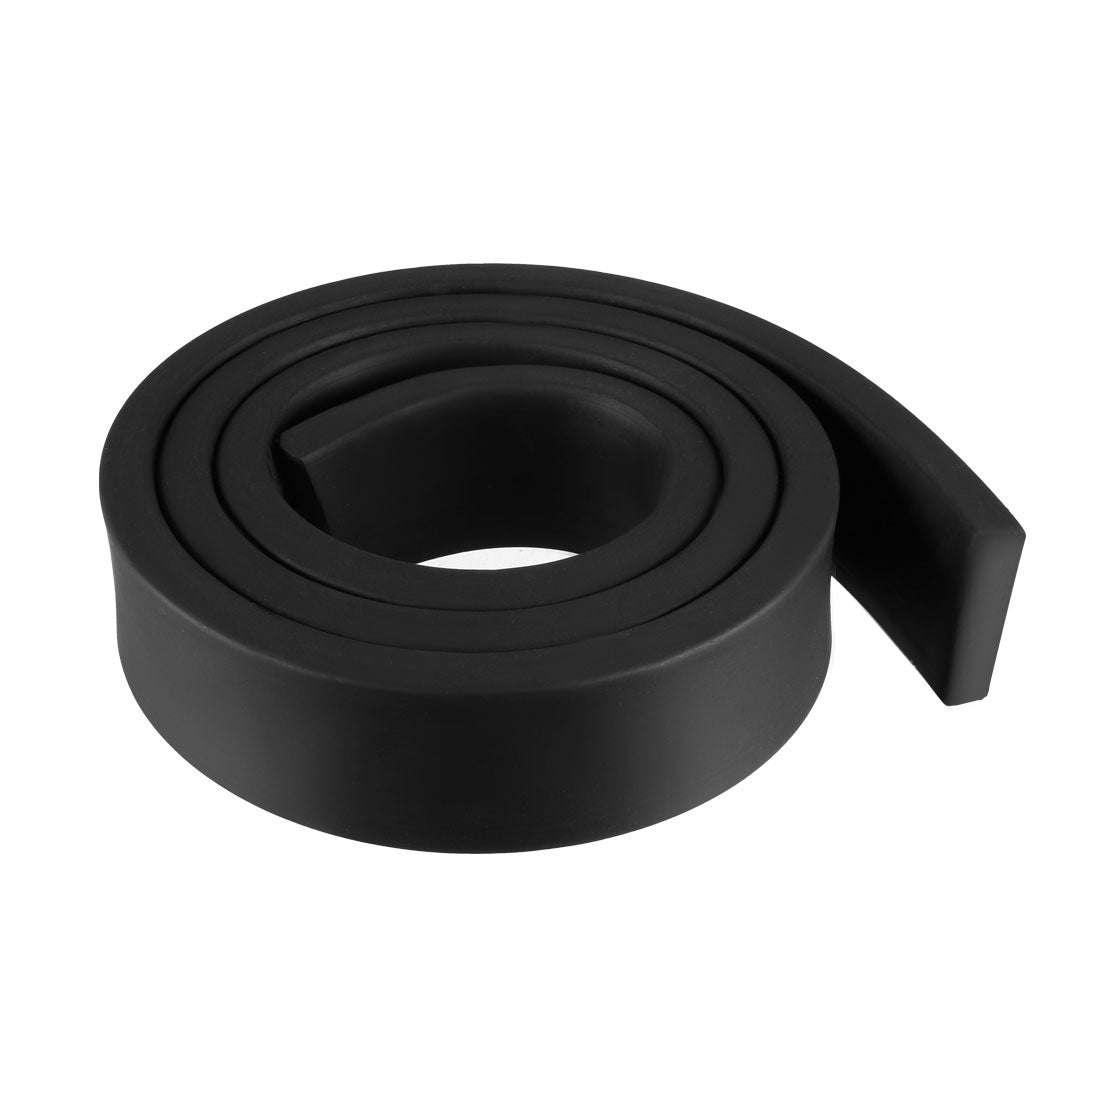 uxcell Uxcell Solid Rectangle Rubber Seal Strip 35mm Wide 10mm Thick, 1 Meter Long Black